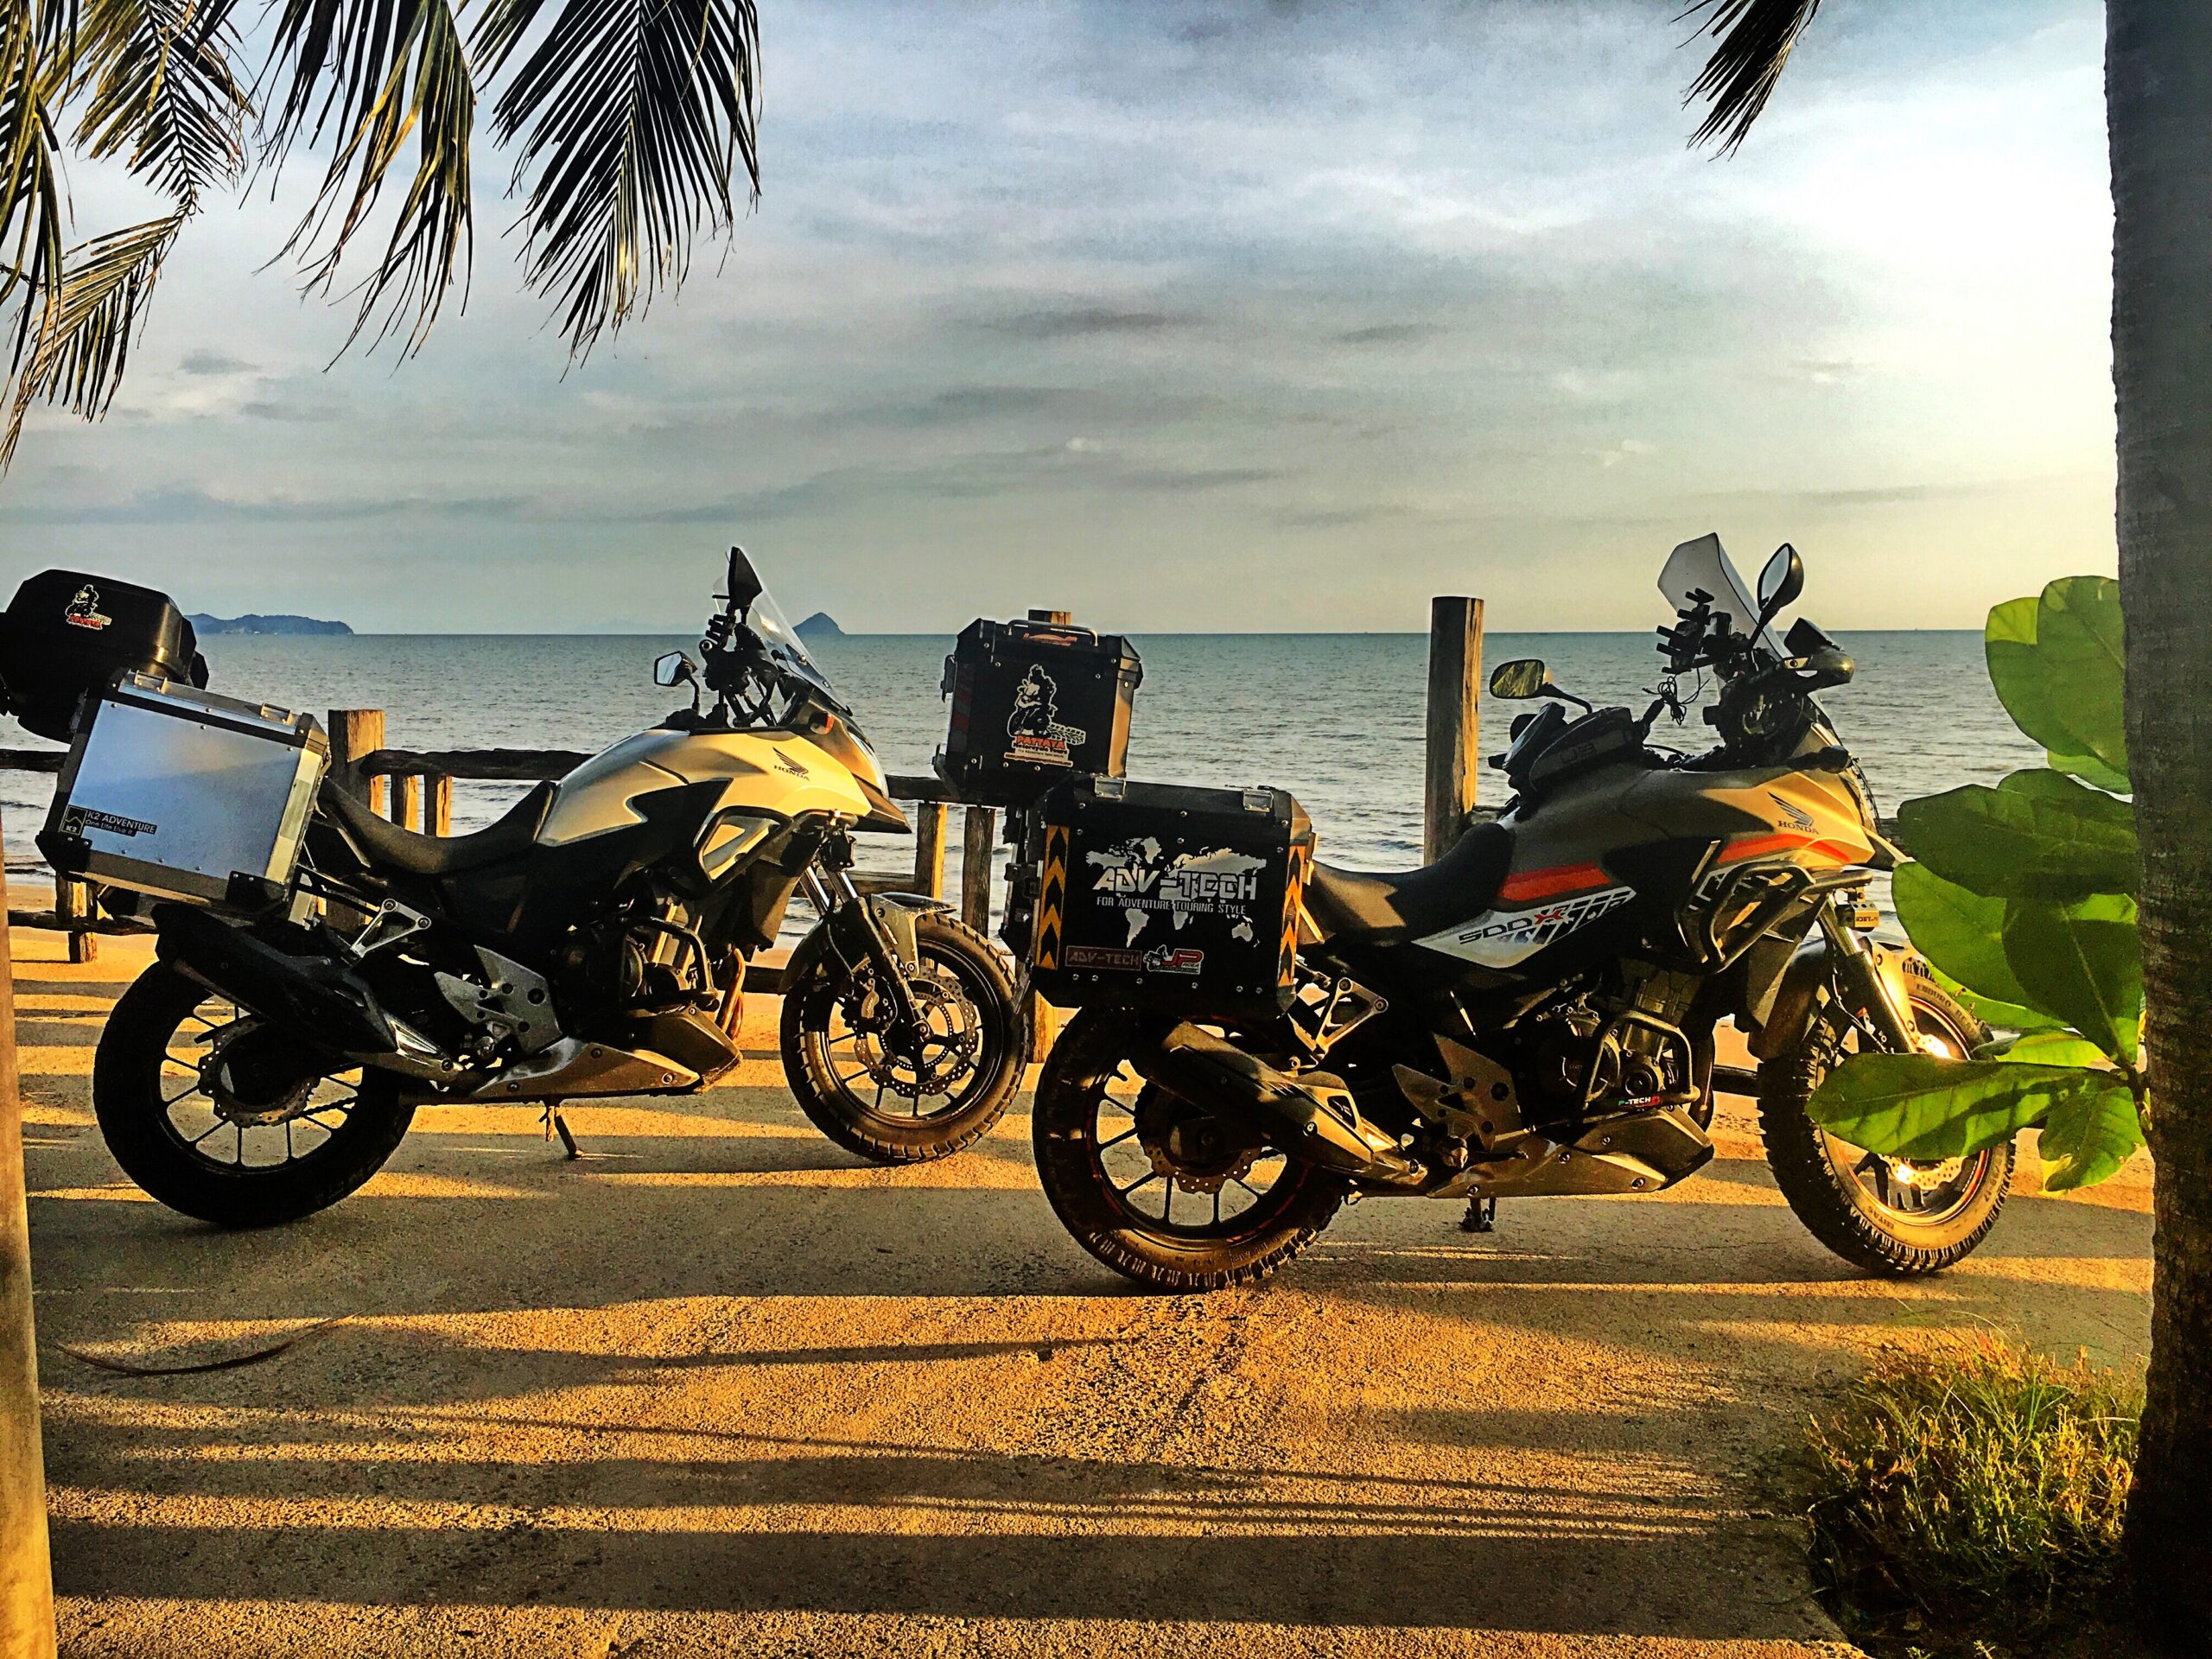 Motorcycles at sunset in Thailand - Pattaya Motorcycle Tours